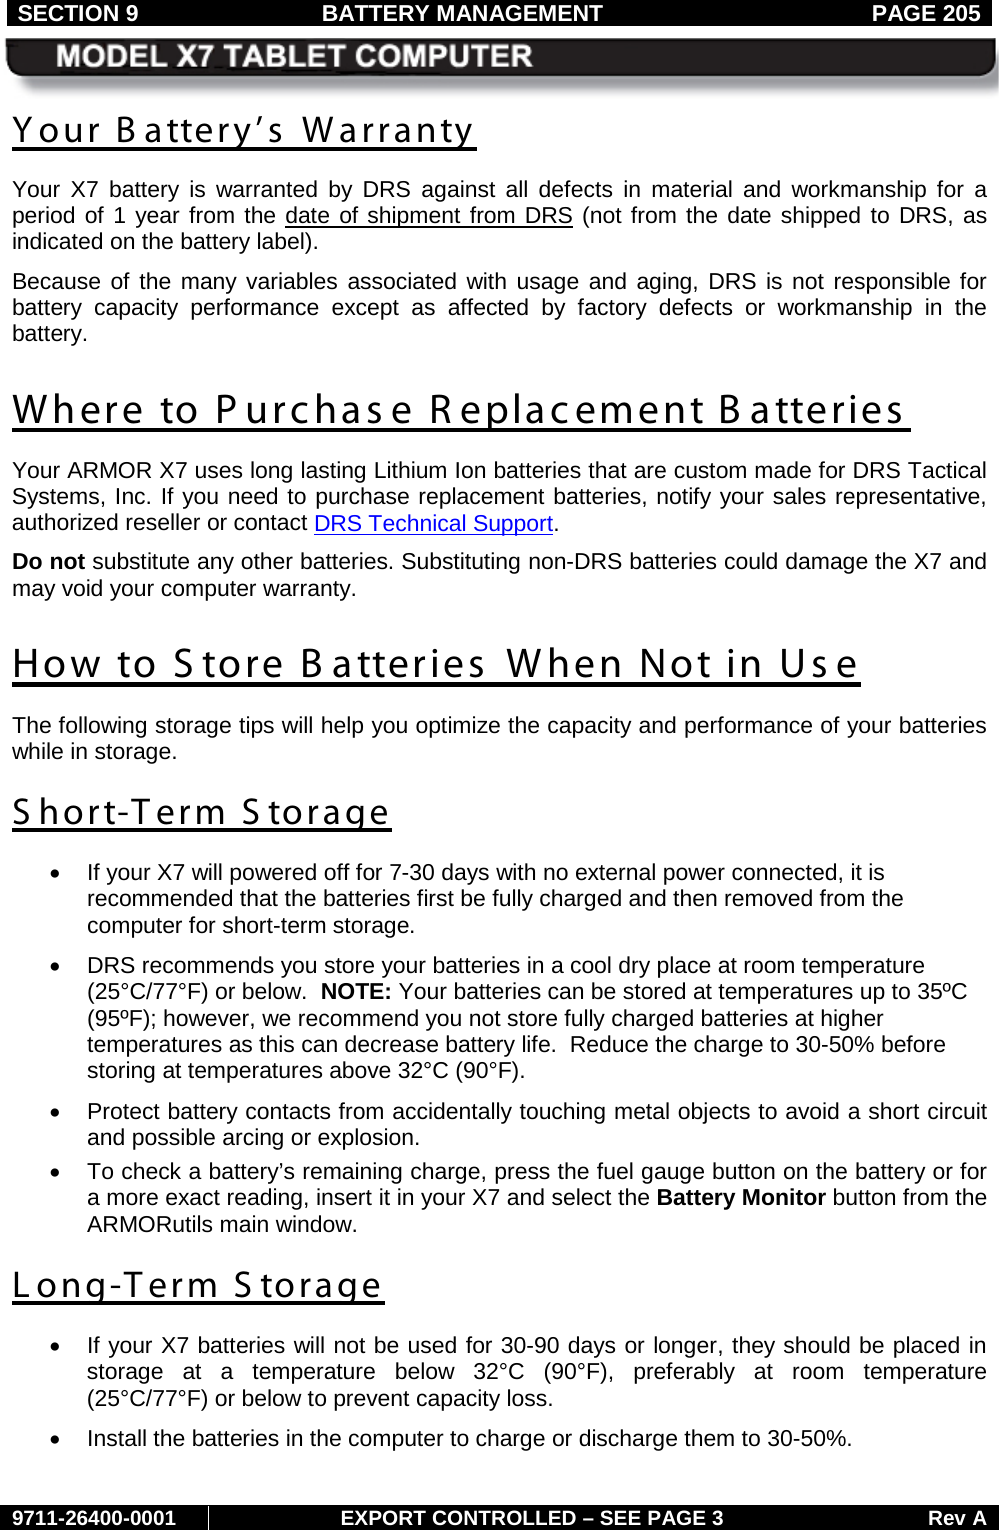 SECTION 9 BATTERY MANAGEMENT  PAGE 205     9711-26400-0001 EXPORT CONTROLLED – SEE PAGE 3 Rev A Your B attery’s Warranty Your  X7 battery is warranted by DRS against all defects in material and workmanship for a period of 1 year from the date of shipment from DRS (not from the date shipped to DRS, as indicated on the battery label). Because of the many variables associated with usage and aging, DRS is not responsible for battery capacity performance except as affected by factory defects or workmanship in the battery.  Where to Purchase R eplacement B atteries Your ARMOR X7 uses long lasting Lithium Ion batteries that are custom made for DRS Tactical Systems, Inc. If you need to purchase replacement batteries, notify your sales representative, authorized reseller or contact DRS Technical Support. Do not substitute any other batteries. Substituting non-DRS batteries could damage the X7 and may void your computer warranty.  How to S tore B atteries When Not in Use The following storage tips will help you optimize the capacity and performance of your batteries while in storage. Short-Term Storage • If your X7 will powered off for 7-30 days with no external power connected, it is recommended that the batteries first be fully charged and then removed from the computer for short-term storage. • DRS recommends you store your batteries in a cool dry place at room temperature (25°C/77°F) or below.  NOTE: Your batteries can be stored at temperatures up to 35ºC (95ºF); however, we recommend you not store fully charged batteries at higher temperatures as this can decrease battery life.  Reduce the charge to 30-50% before storing at temperatures above 32°C (90°F). • Protect battery contacts from accidentally touching metal objects to avoid a short circuit and possible arcing or explosion. •  To check a battery’s remaining charge, press the fuel gauge button on the battery or for a more exact reading, insert it in your X7 and select the Battery Monitor button from the ARMORutils main window. Long-T erm S torage • If your X7 batteries will not be used for 30-90 days or longer, they should be placed in storage at a temperature below 32°C (90°F), preferably at room temperature (25°C/77°F) or below to prevent capacity loss. • Install the batteries in the computer to charge or discharge them to 30-50%.  